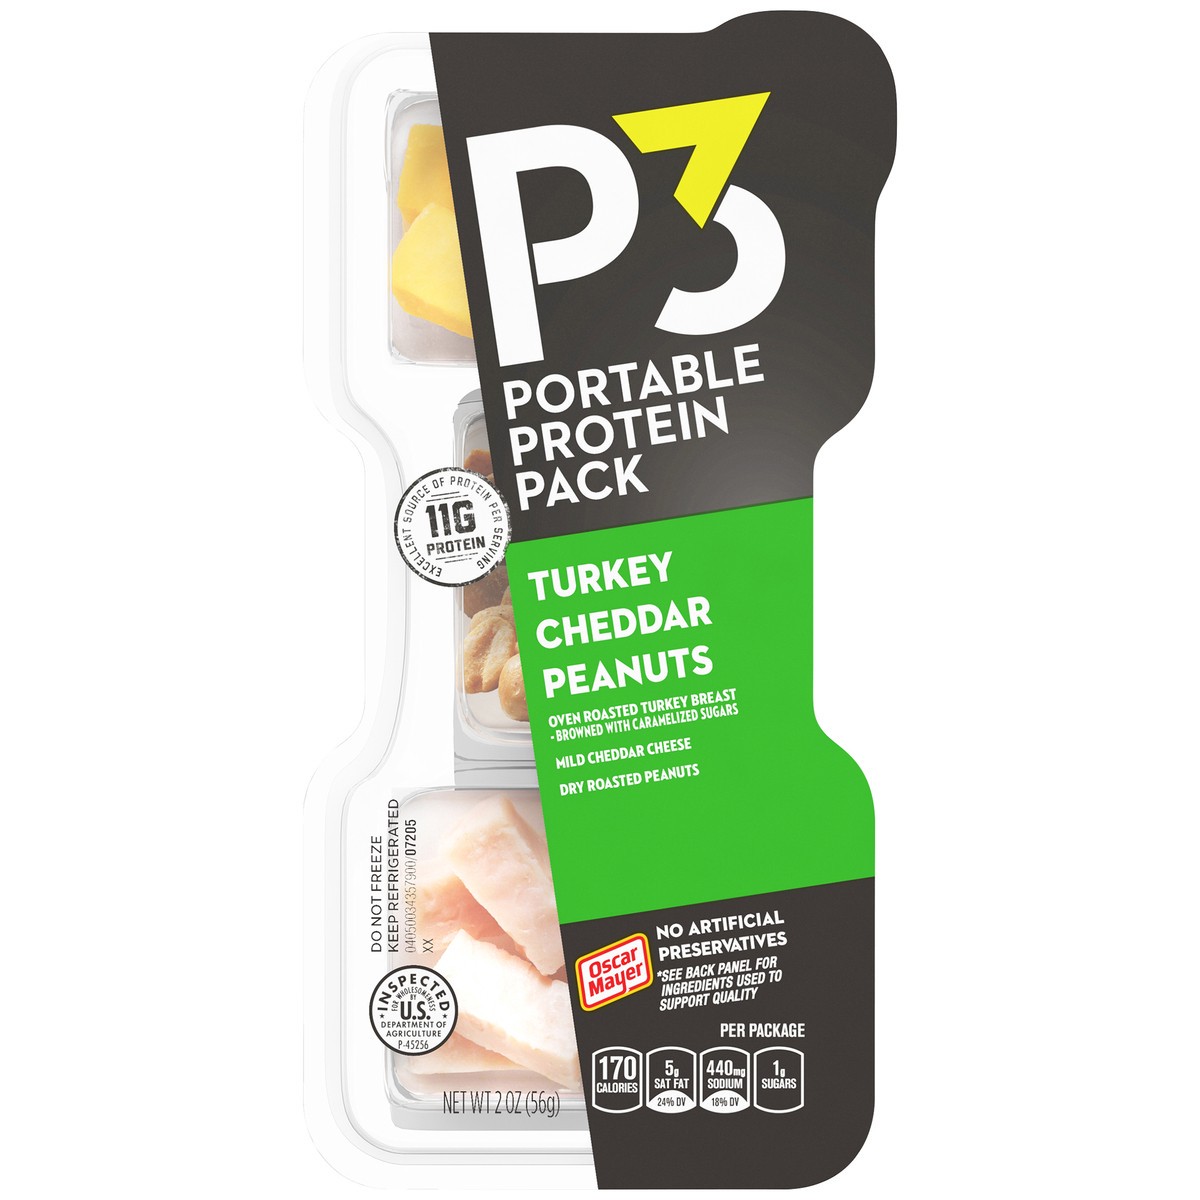 slide 6 of 9, P3 Portable Protein Snack Pack with Turkey, Peanuts & Cheddar Cheese, 2 oz Tray, 2 oz